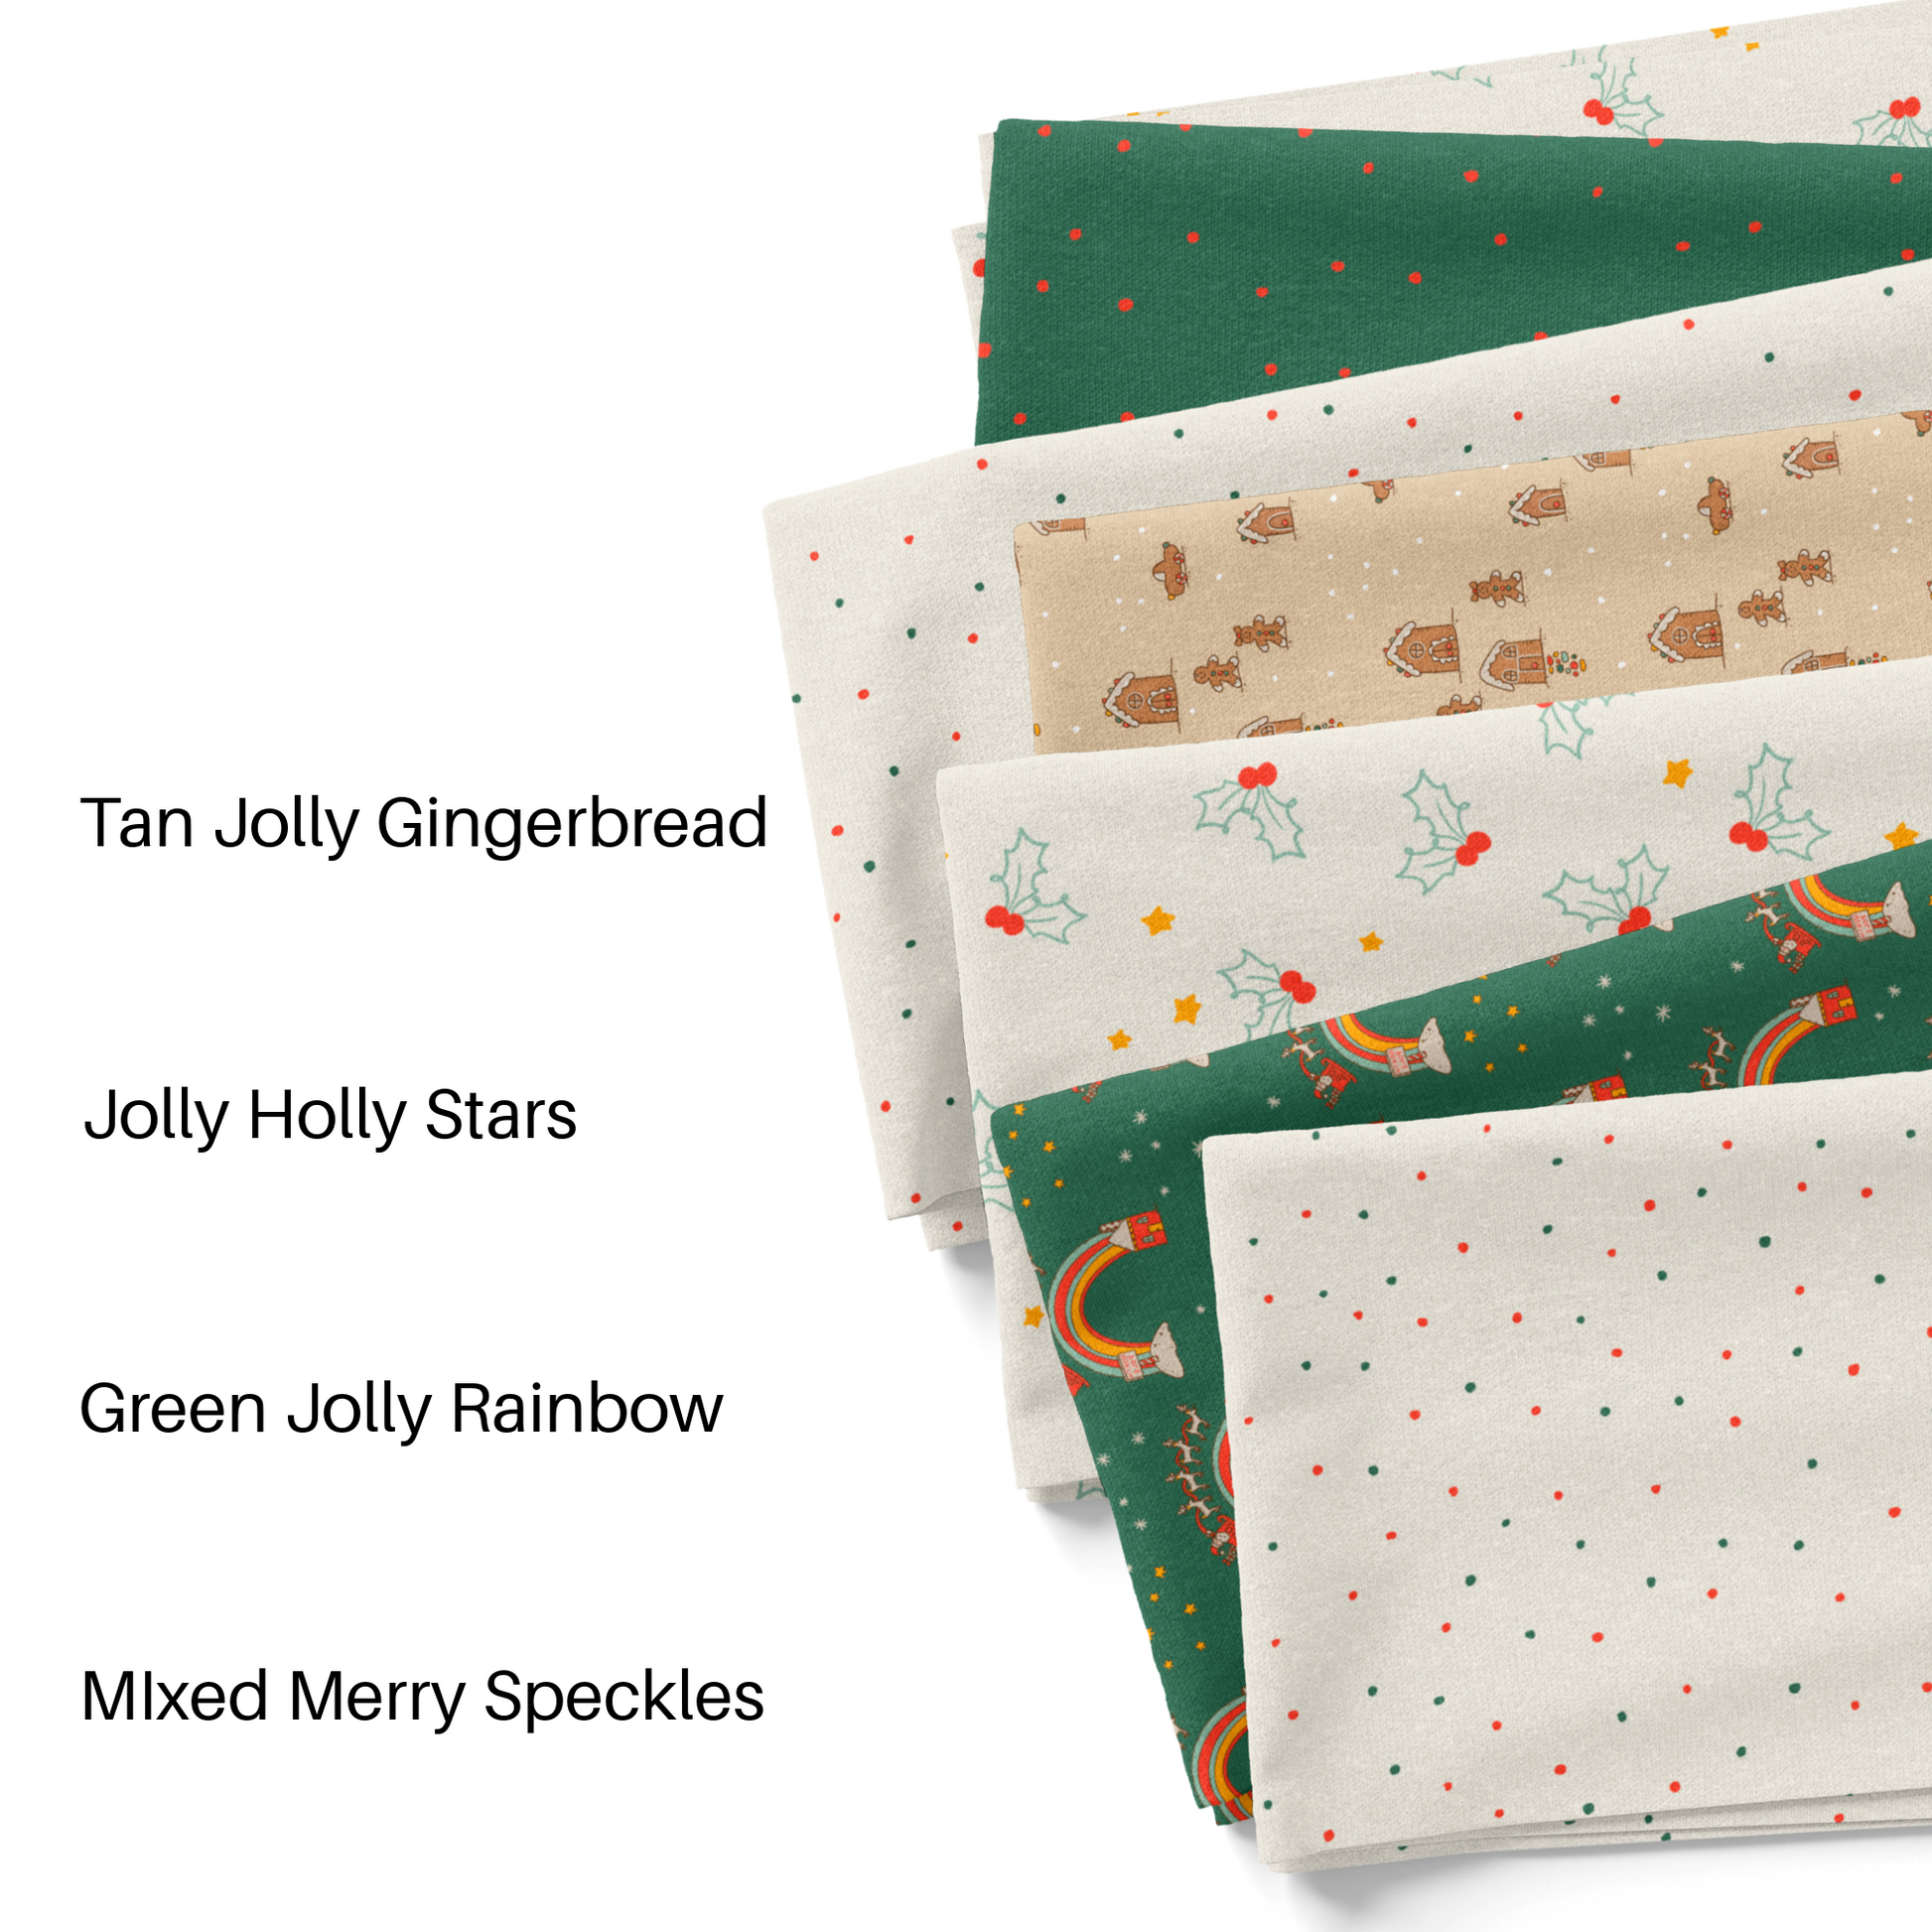 Wild Daisy Gallery's Christmas fabric by the yard swatches.